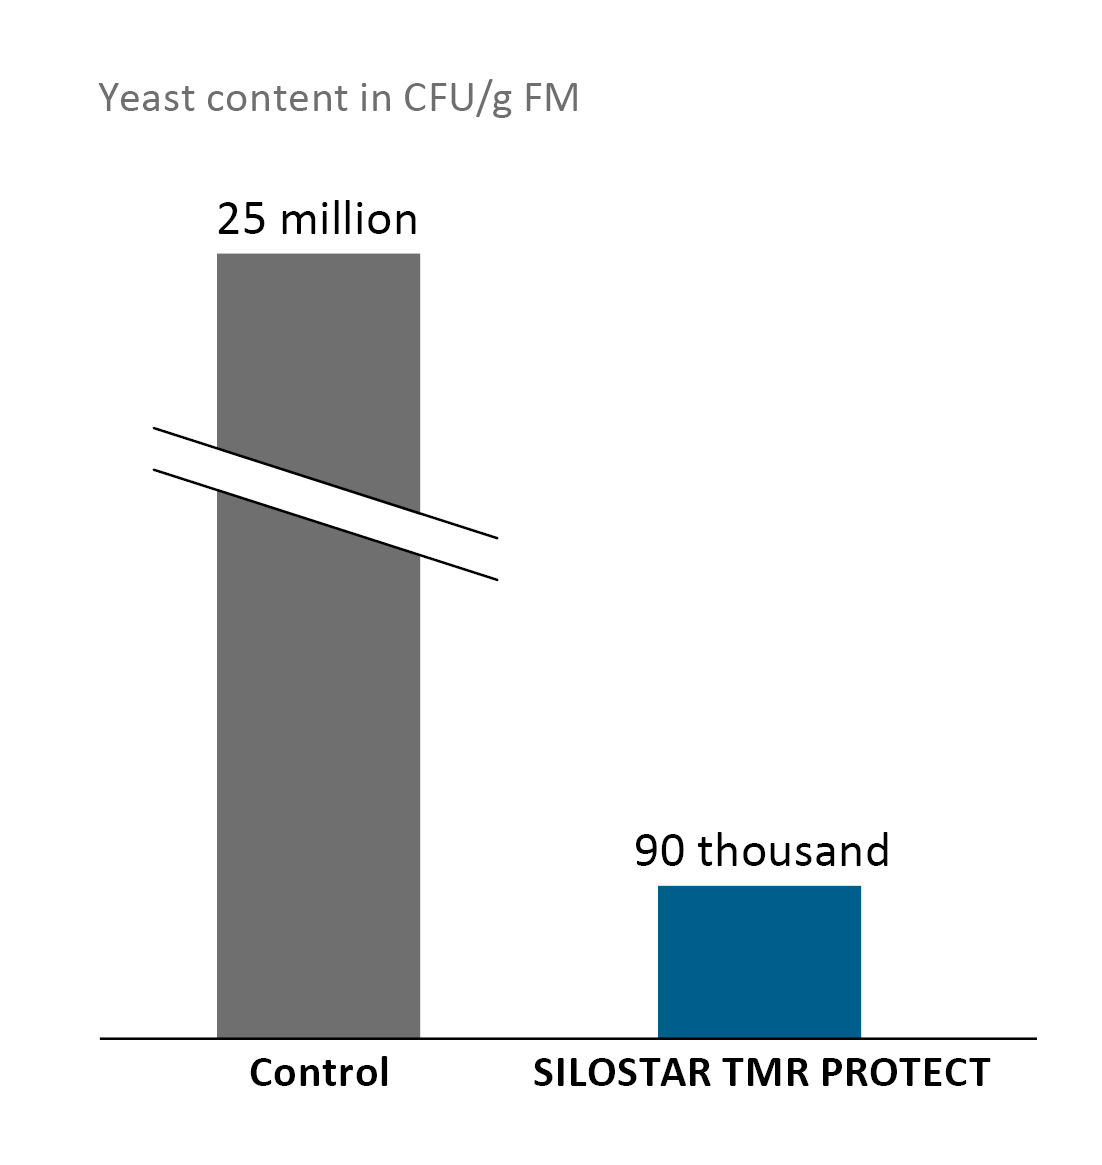 SILOSTAR TMR PROTECT reduces yeast infestations